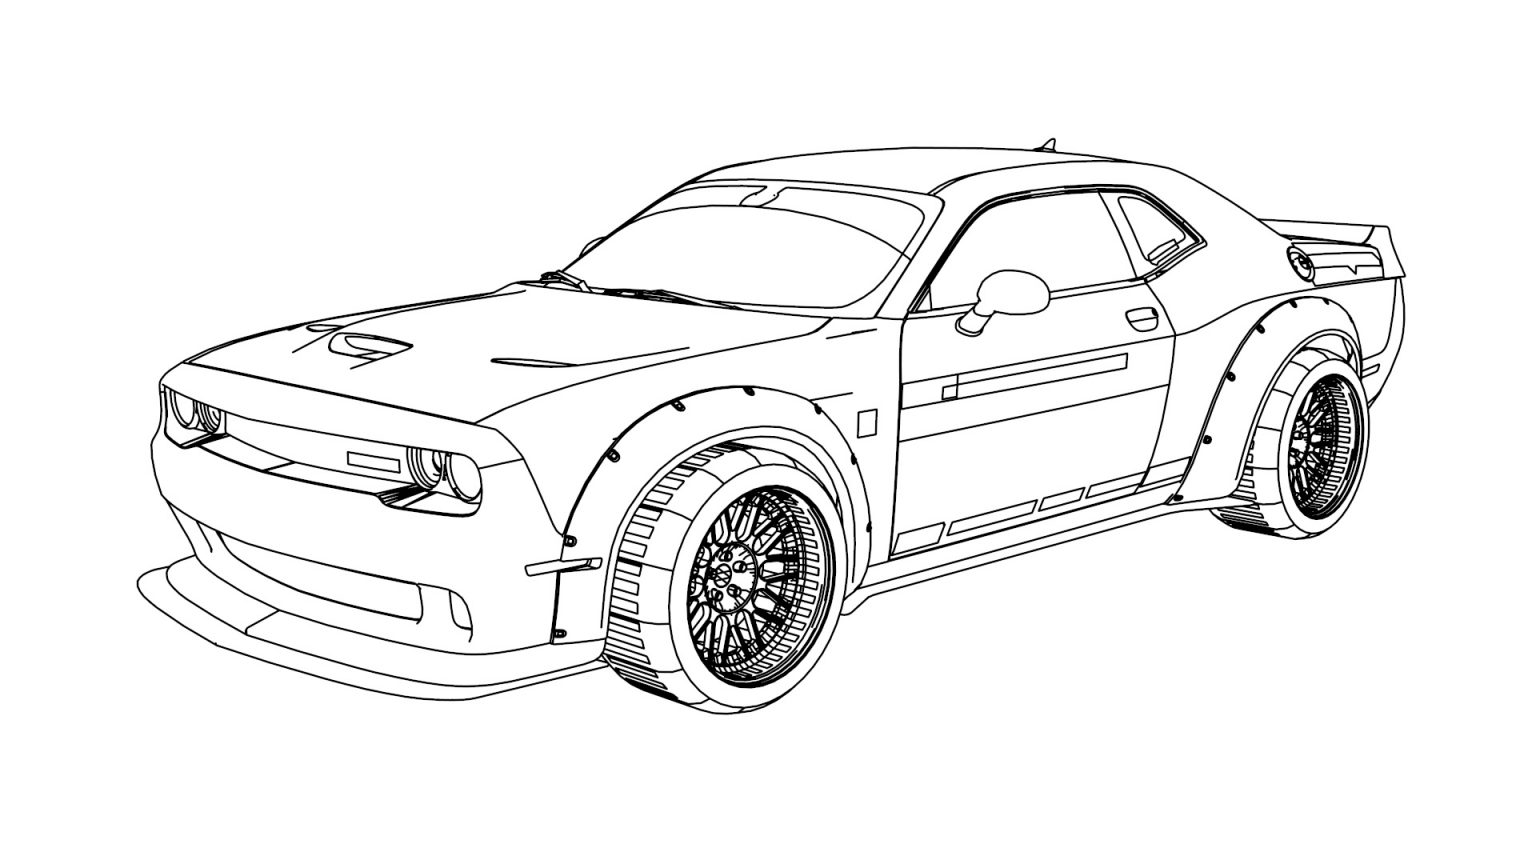 Dodge Challenger SRT Hellcat LBW 2015 Coloring Page  Wecoloringpage.com